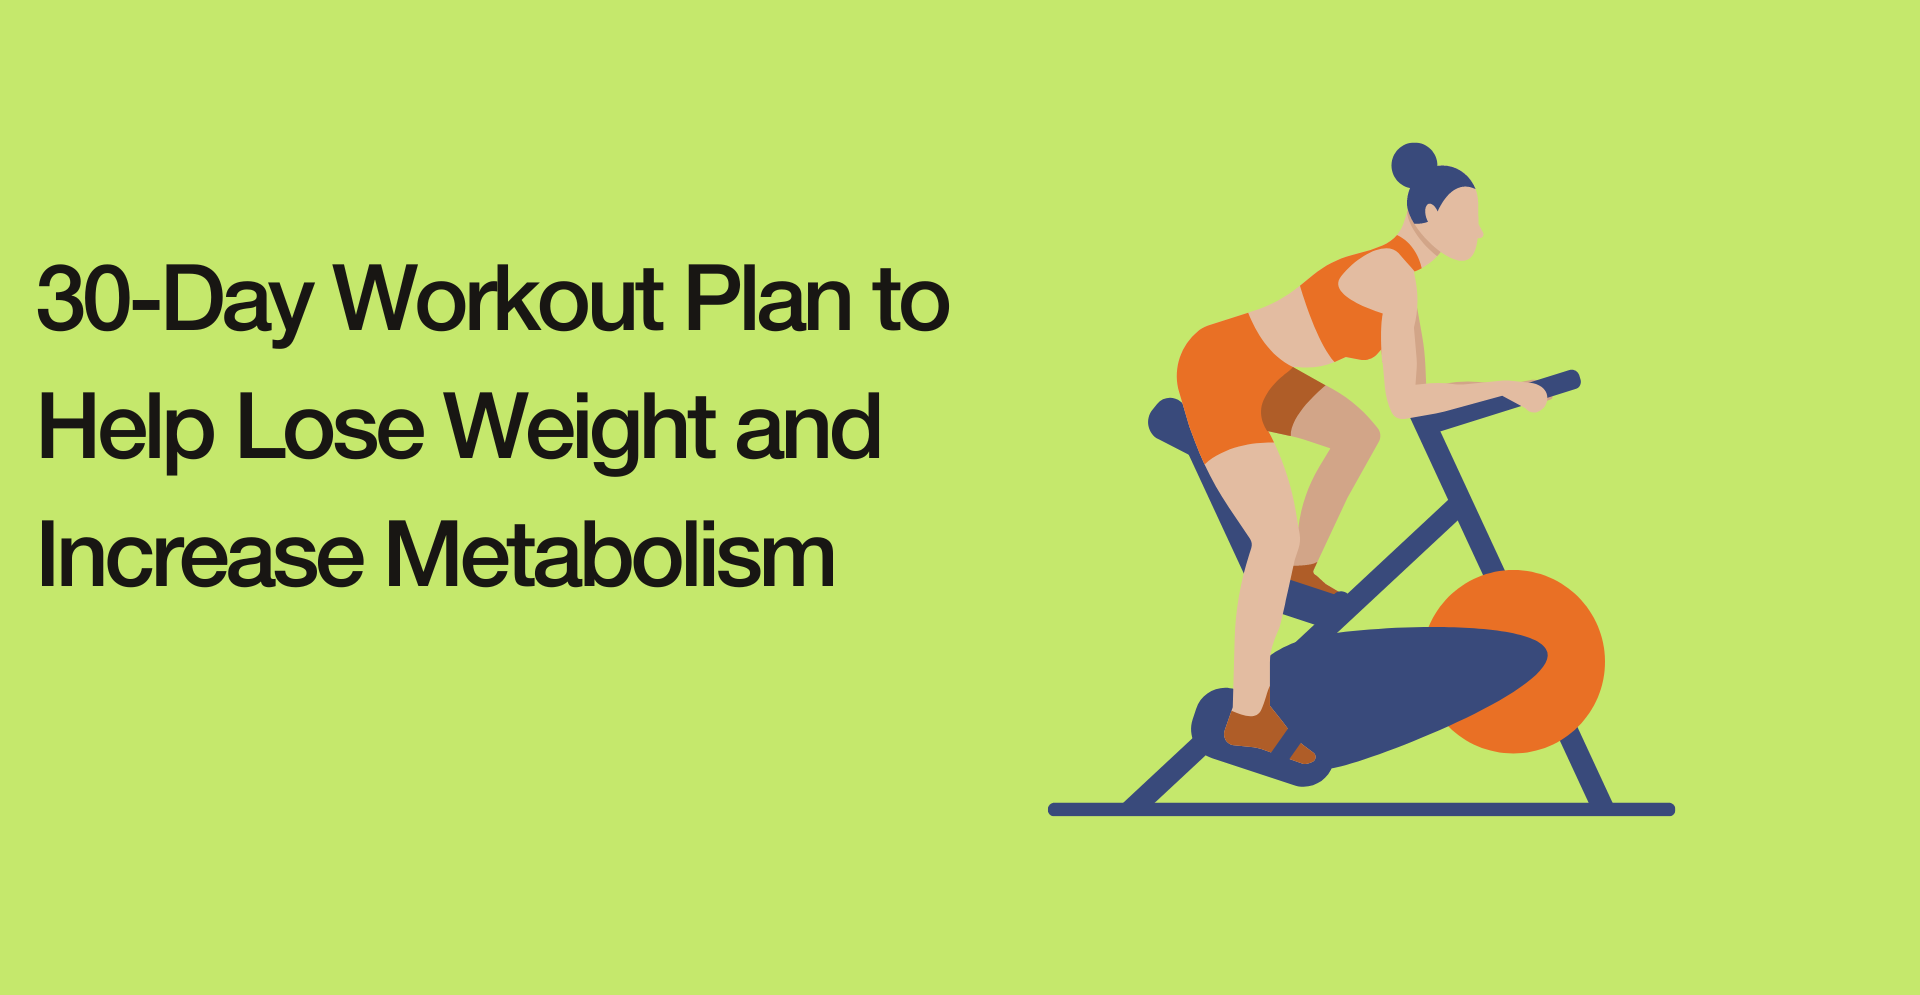 30-Day Workout Plan to Help Lose Weight and Increase Metabolism